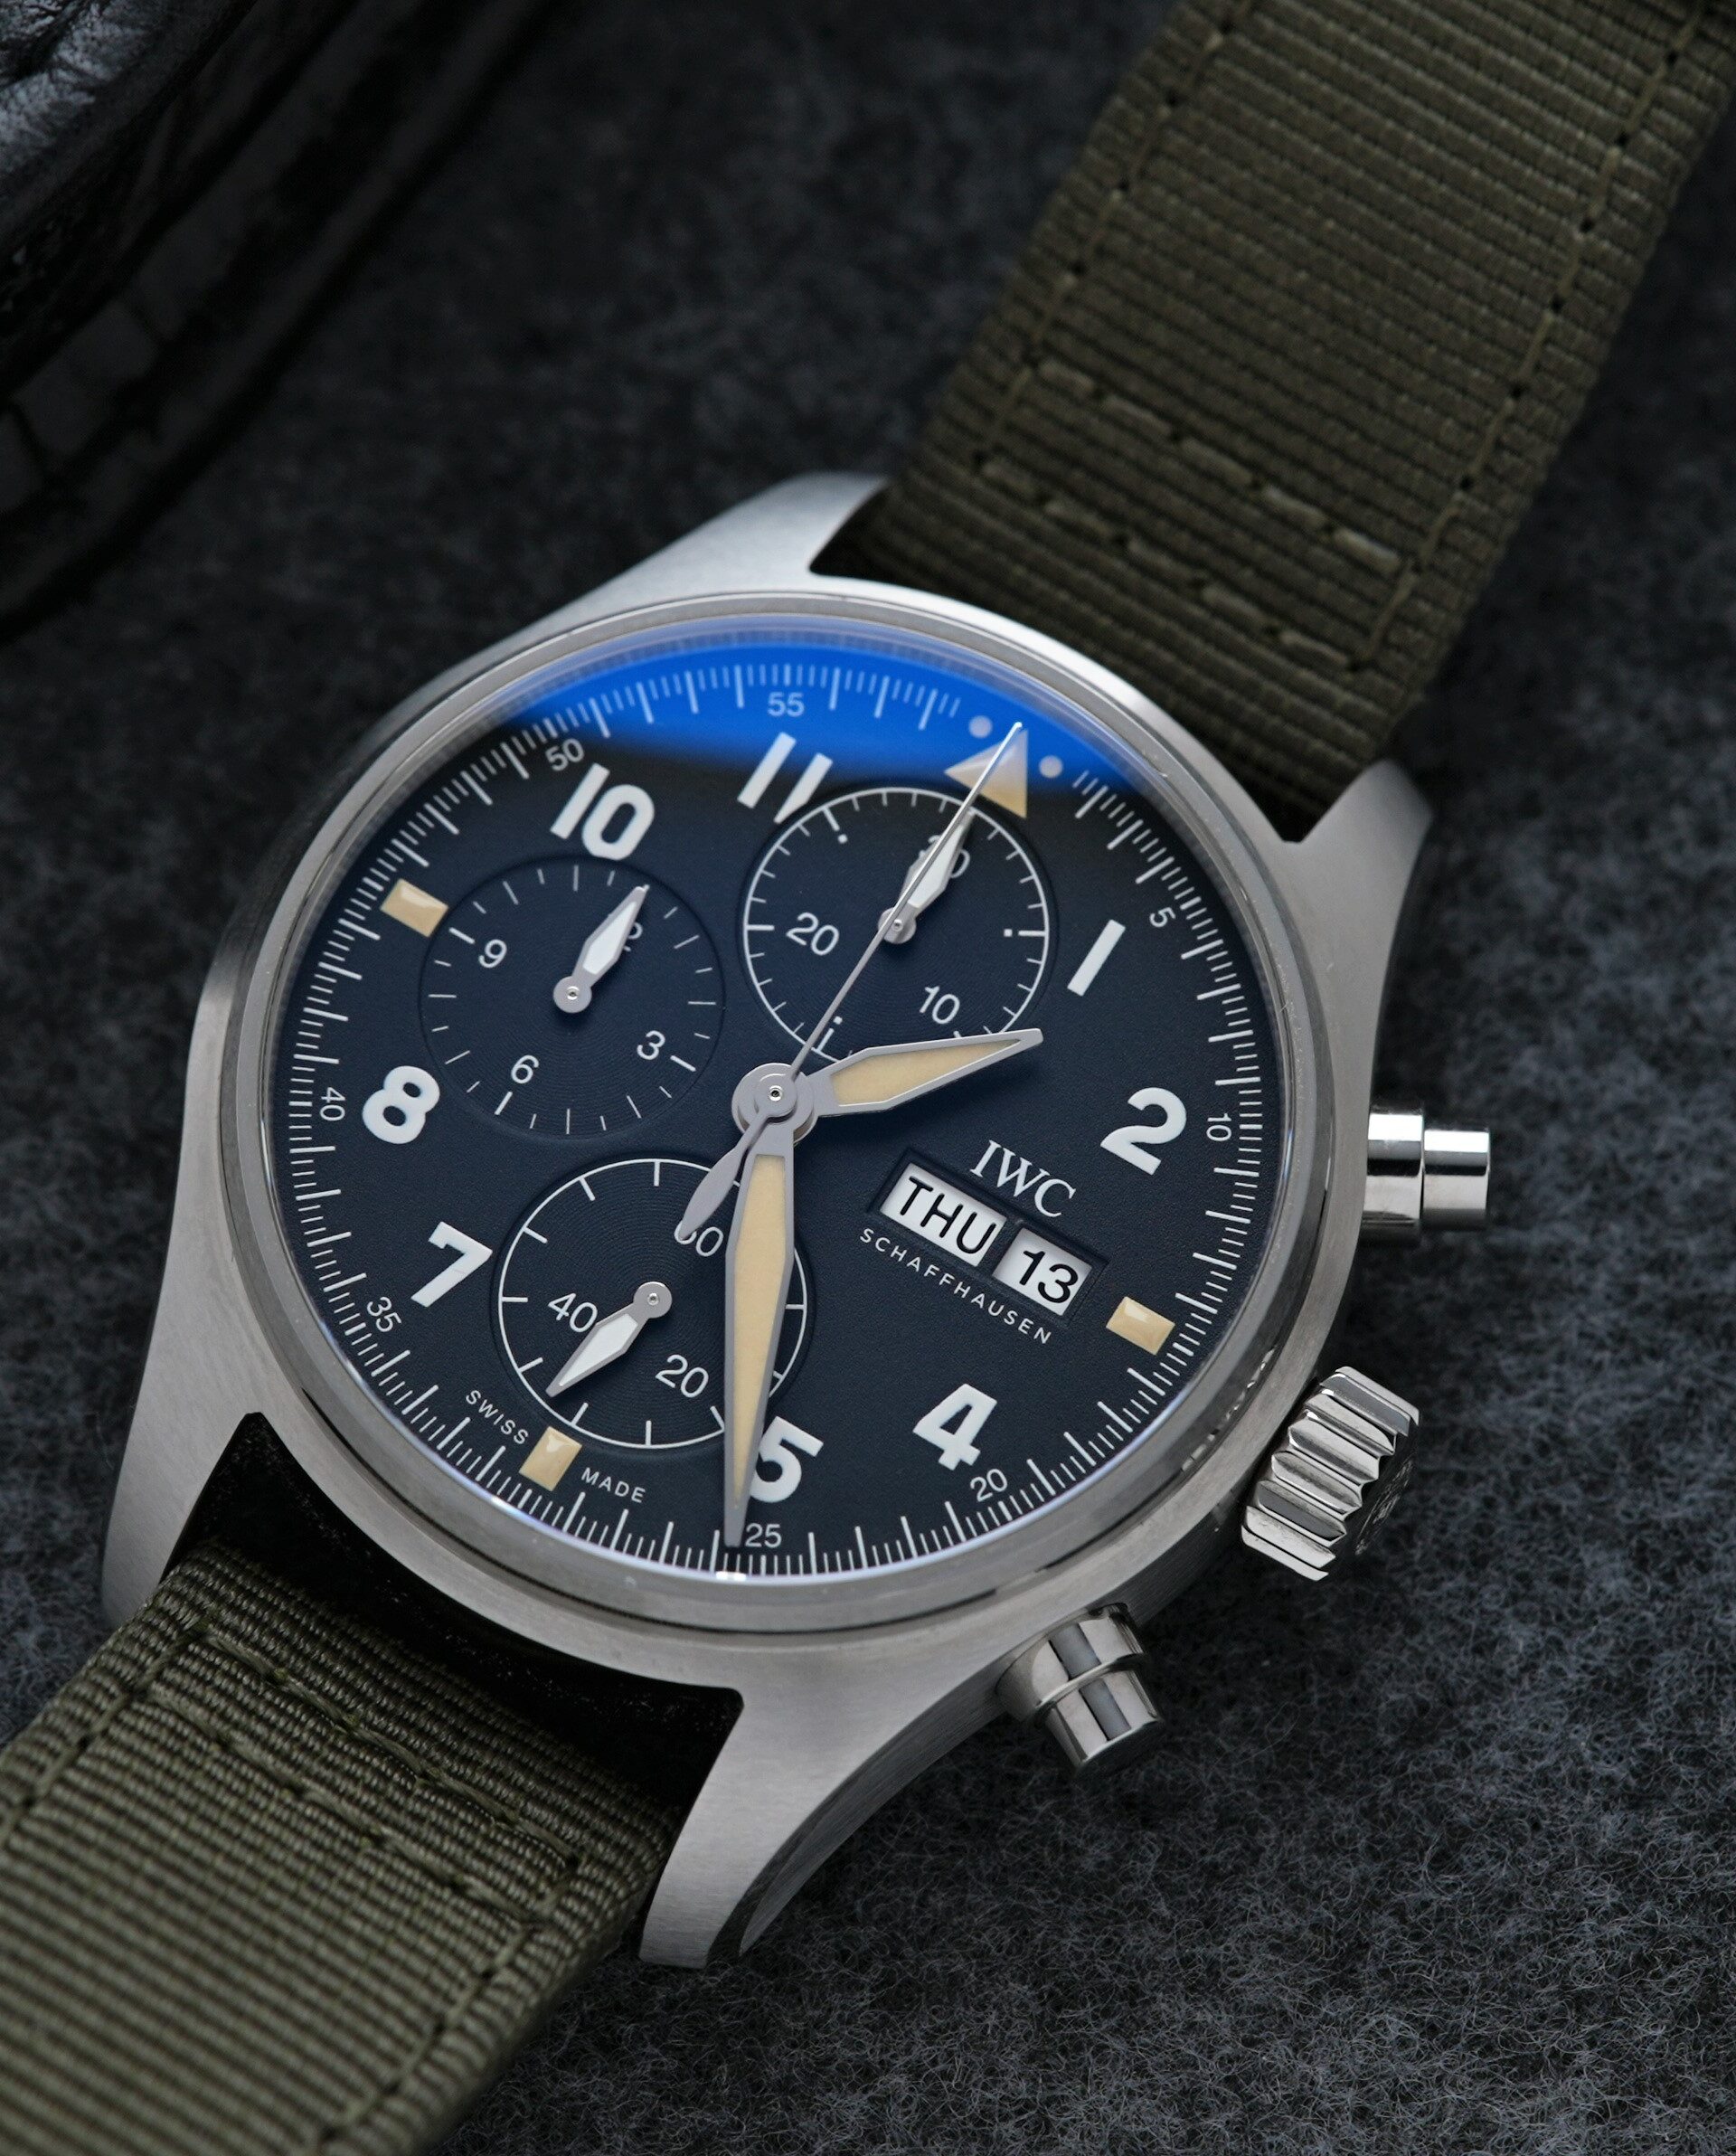 IWC Pilot Spitfire Chronograph 41MM IW387901 wristwatch on display with loop in background.